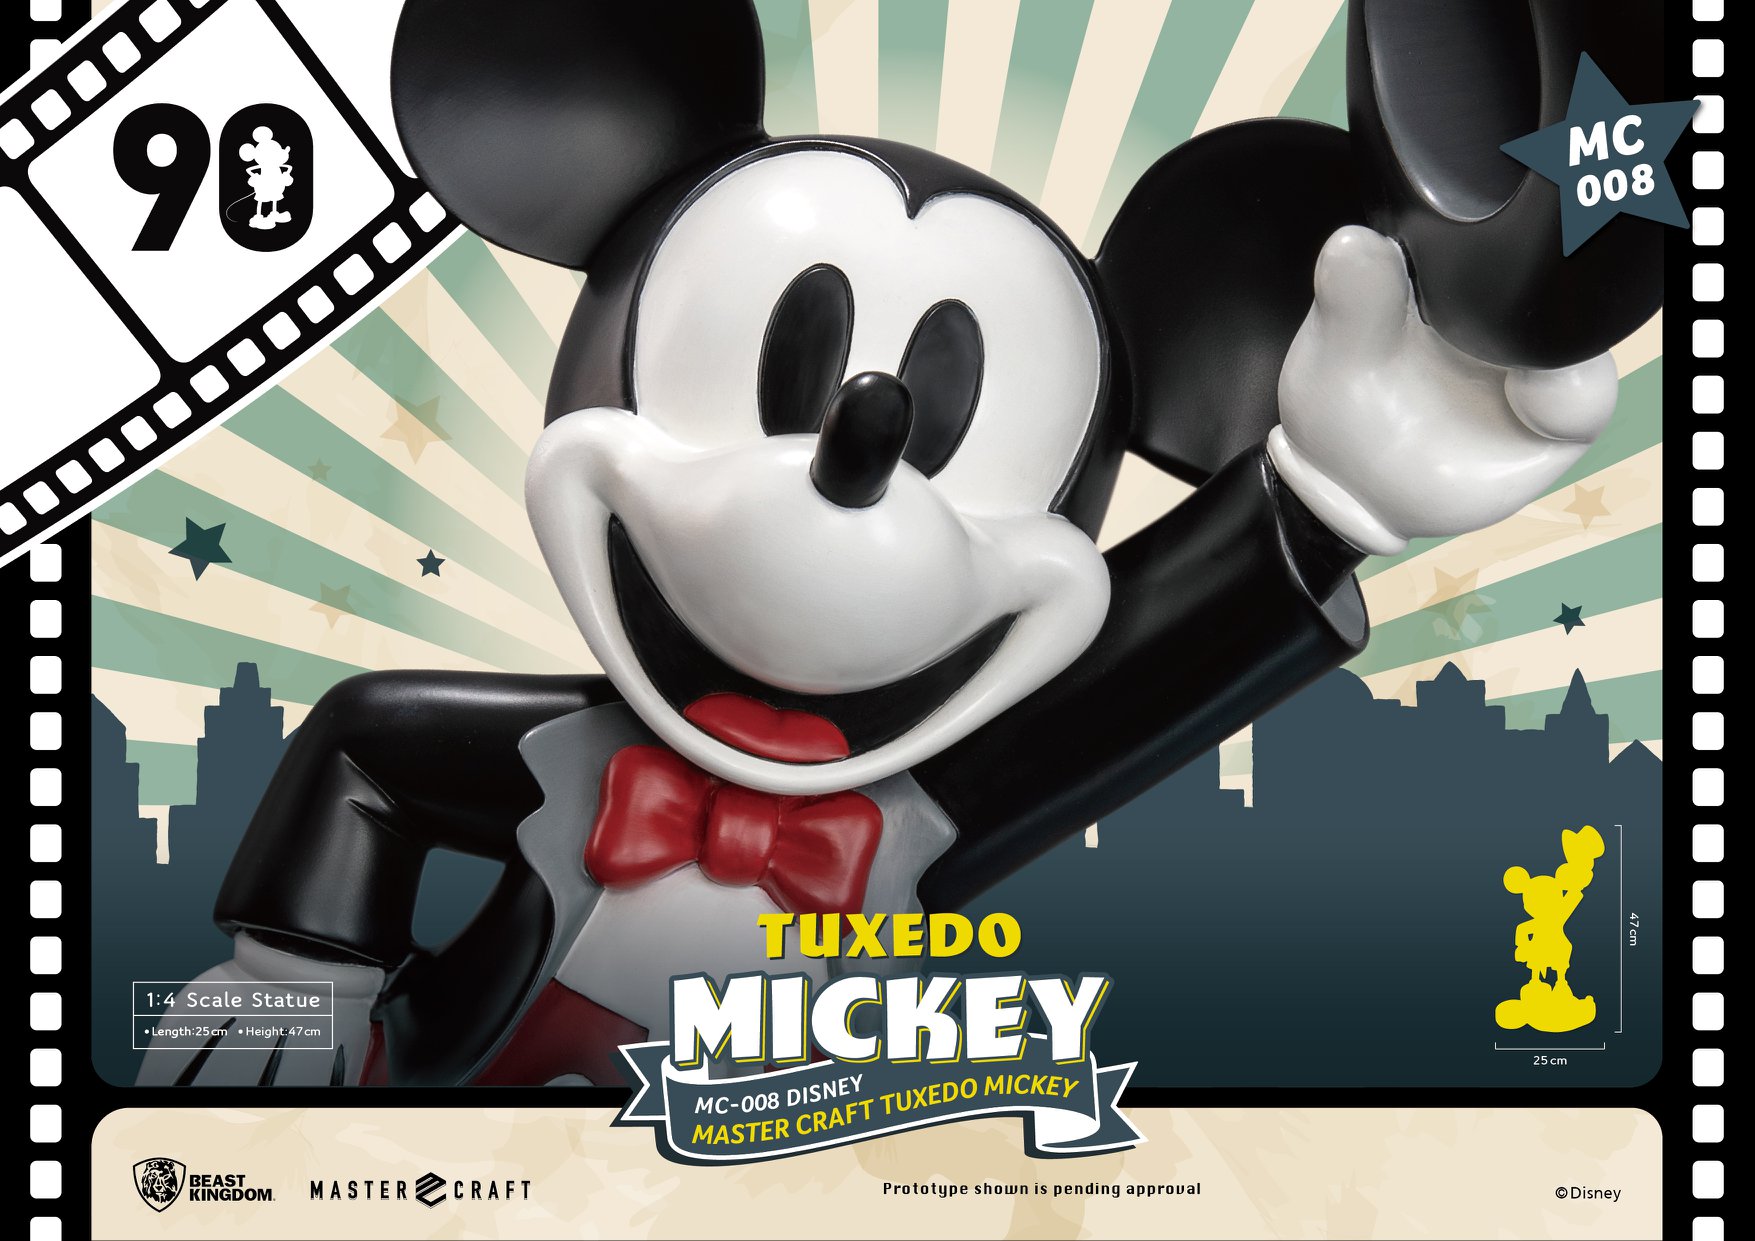 008 Disney Master Craft Tuxedo Mickey Mouse statue, which is being released...